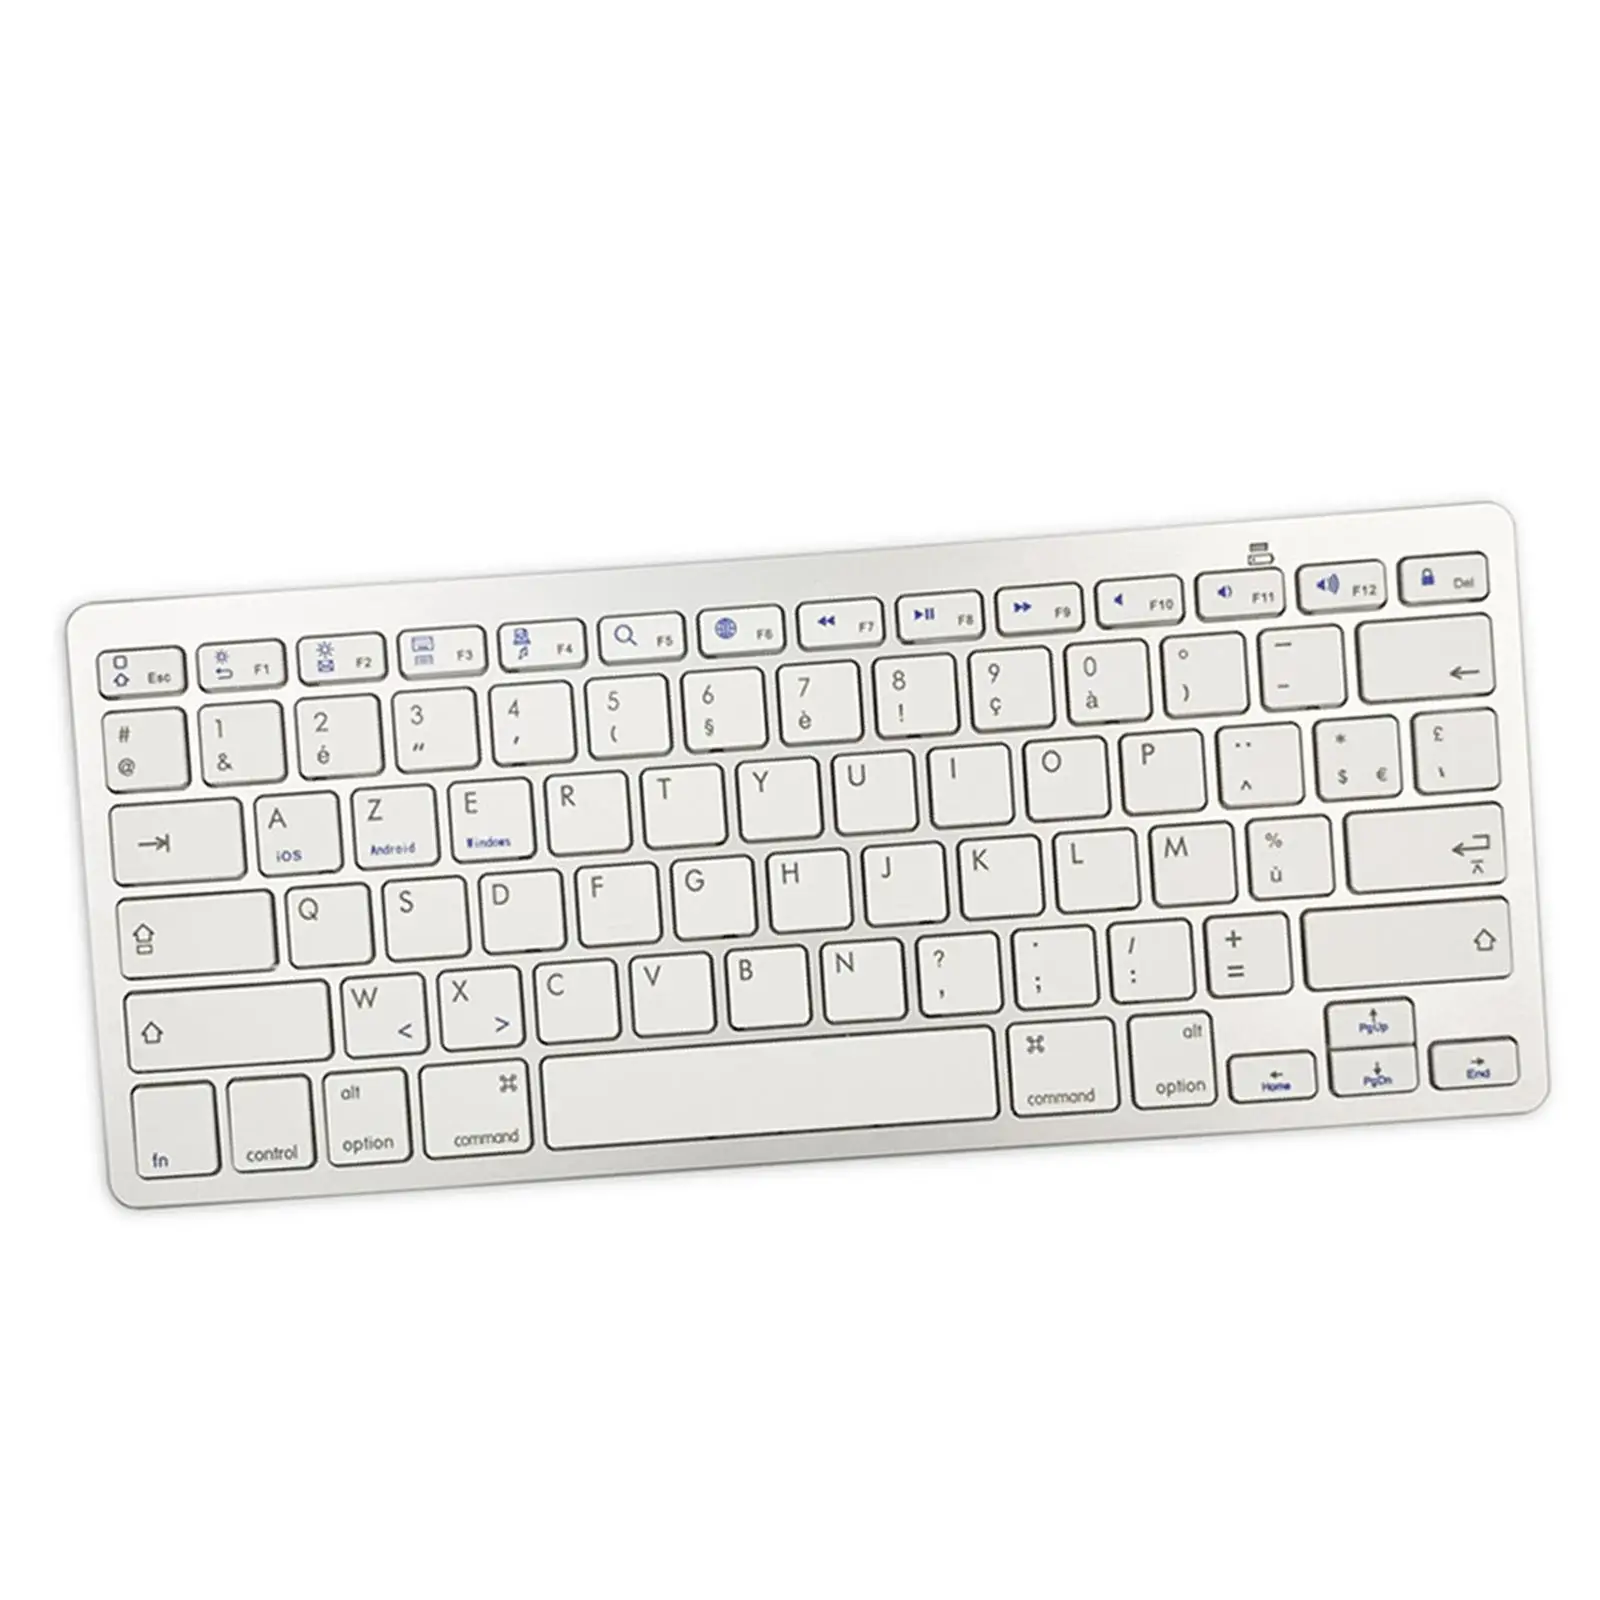 7 Keyboard ,French Language, Silver Slim New Portable for iOS Android Windows Computer PC